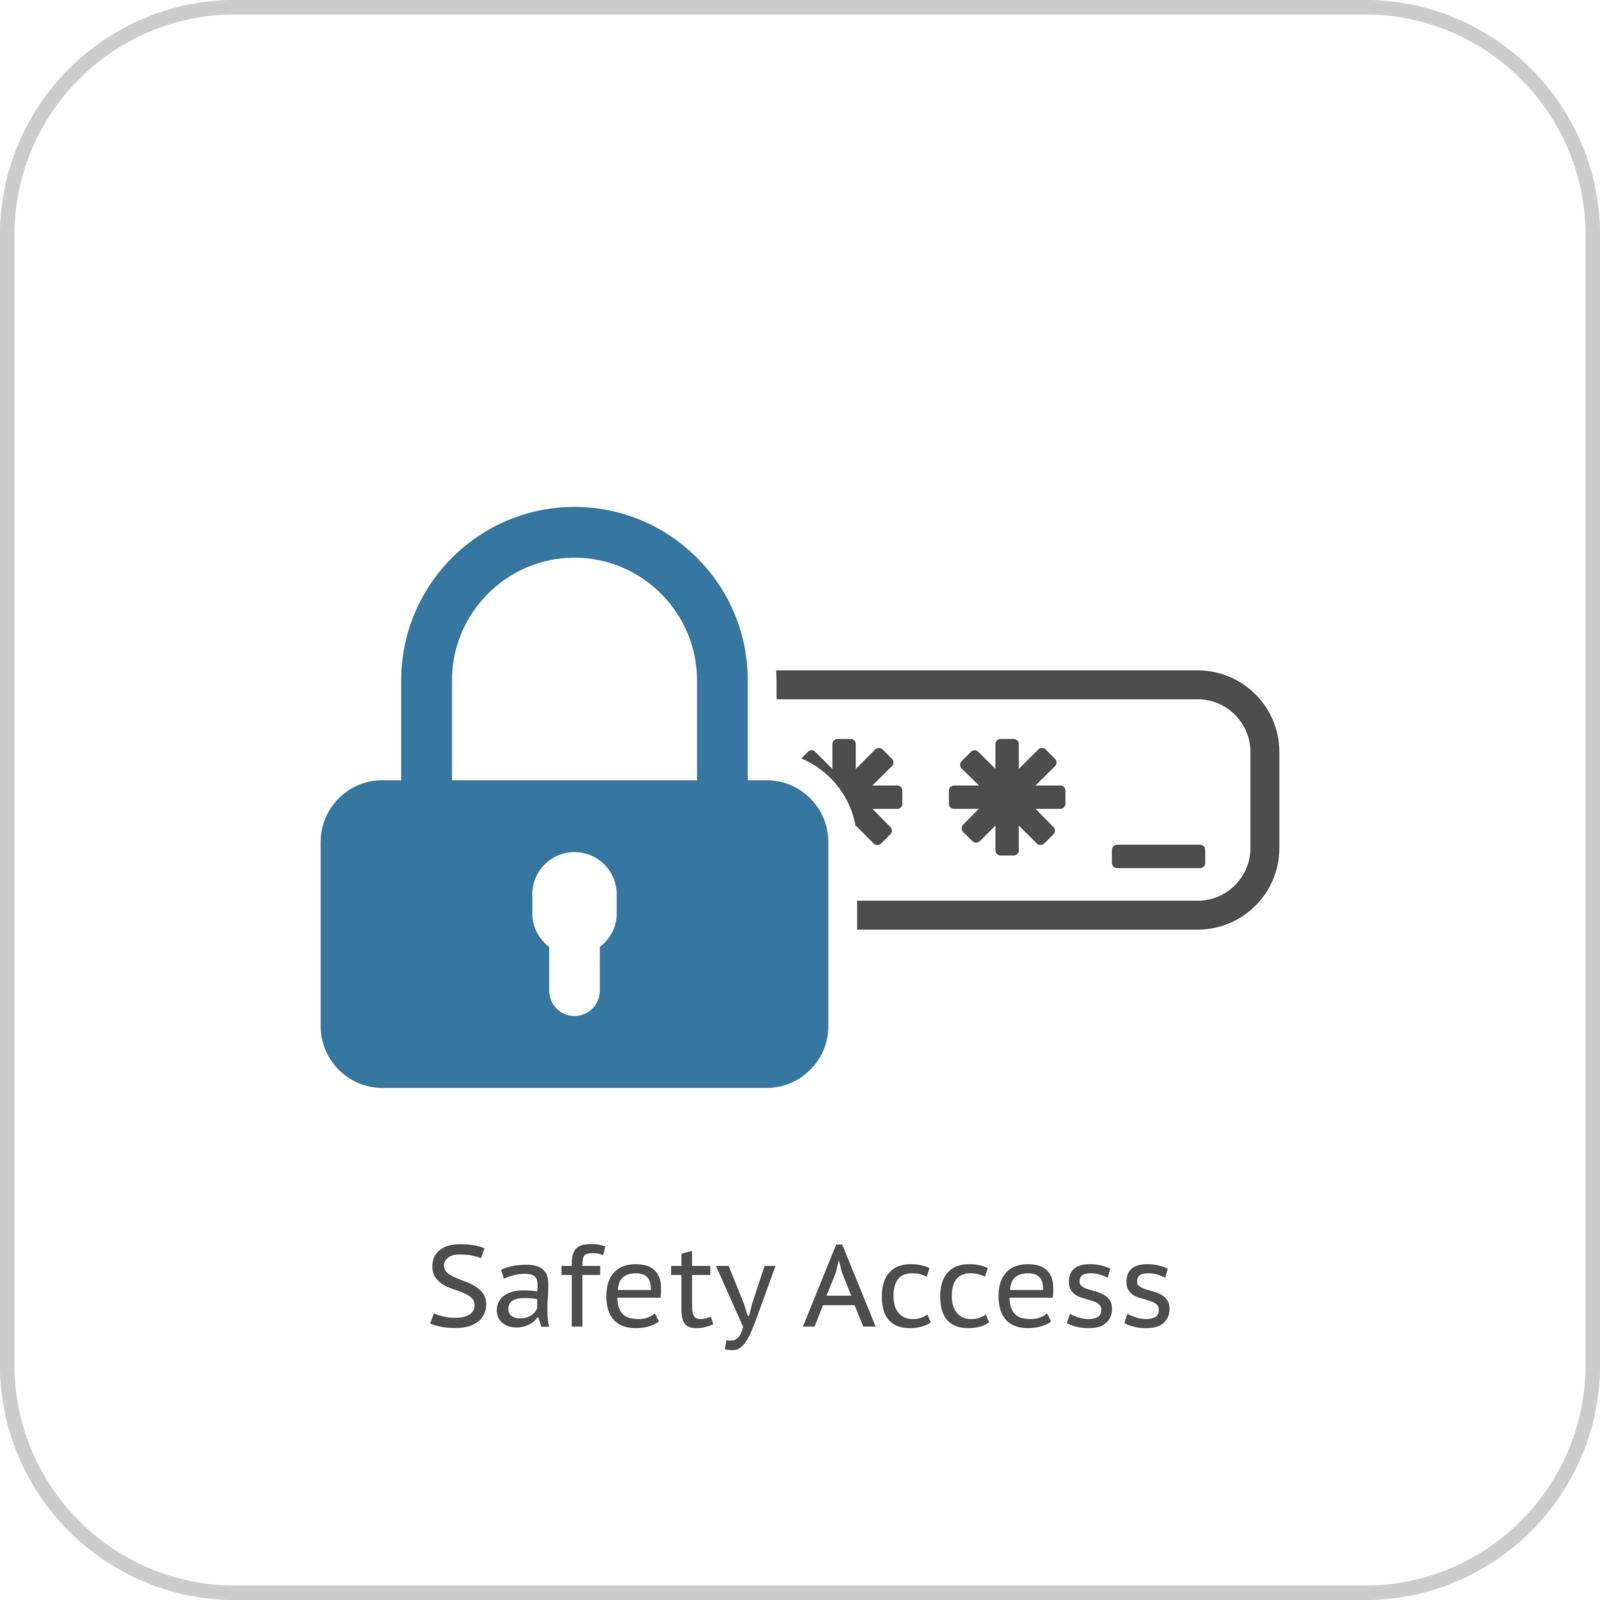 Safety Access and Password Protection Icon. Flat Design. Security Concept with a Padlock and a Password box. Isolated Illustration. App Symbol or UI element.